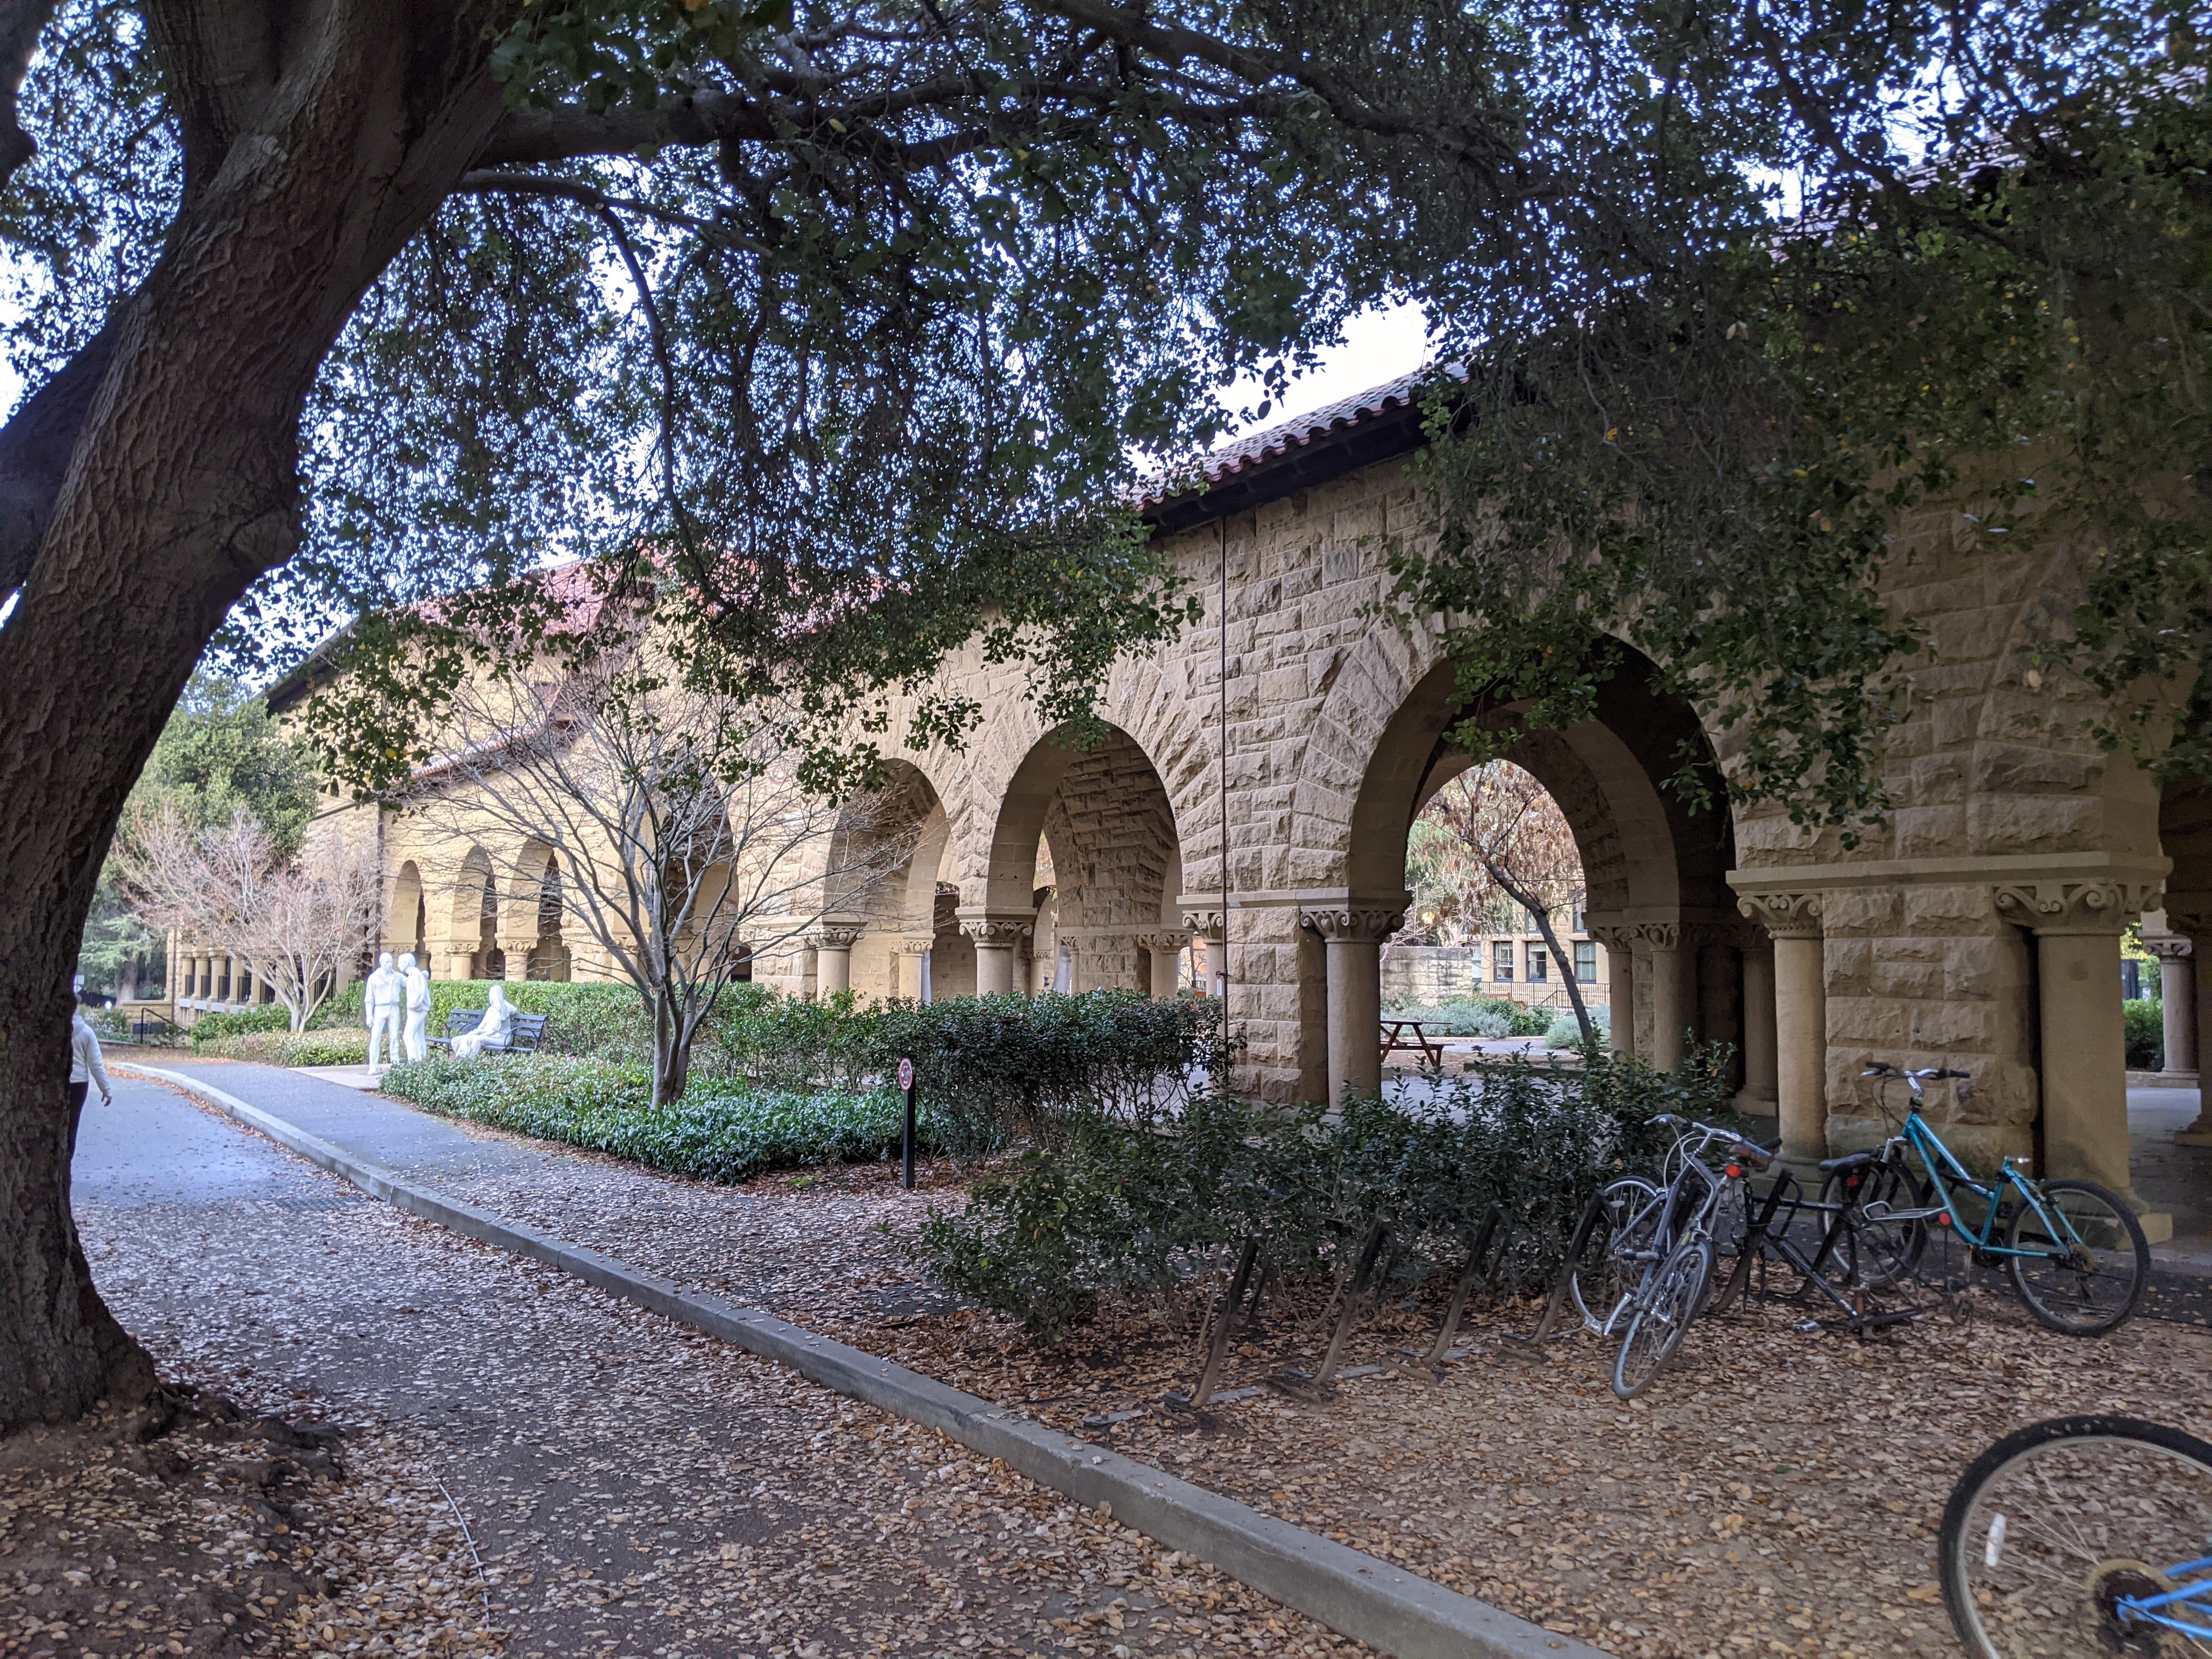 Image of Stanford campus